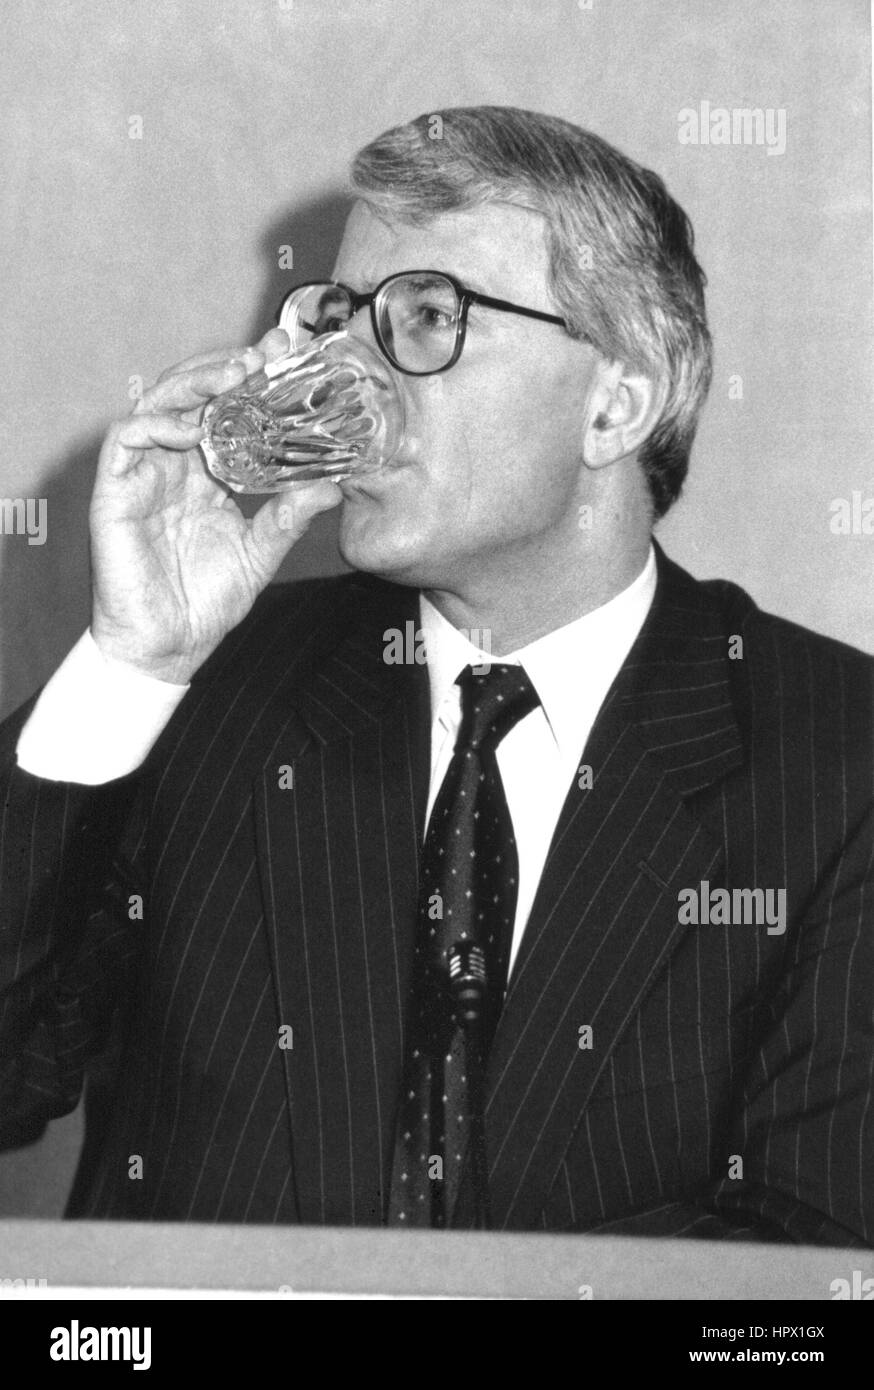 Rt. Hon. John Major, British Prime Minister, attends a press conference in London, England on March 20, 1992. Stock Photo